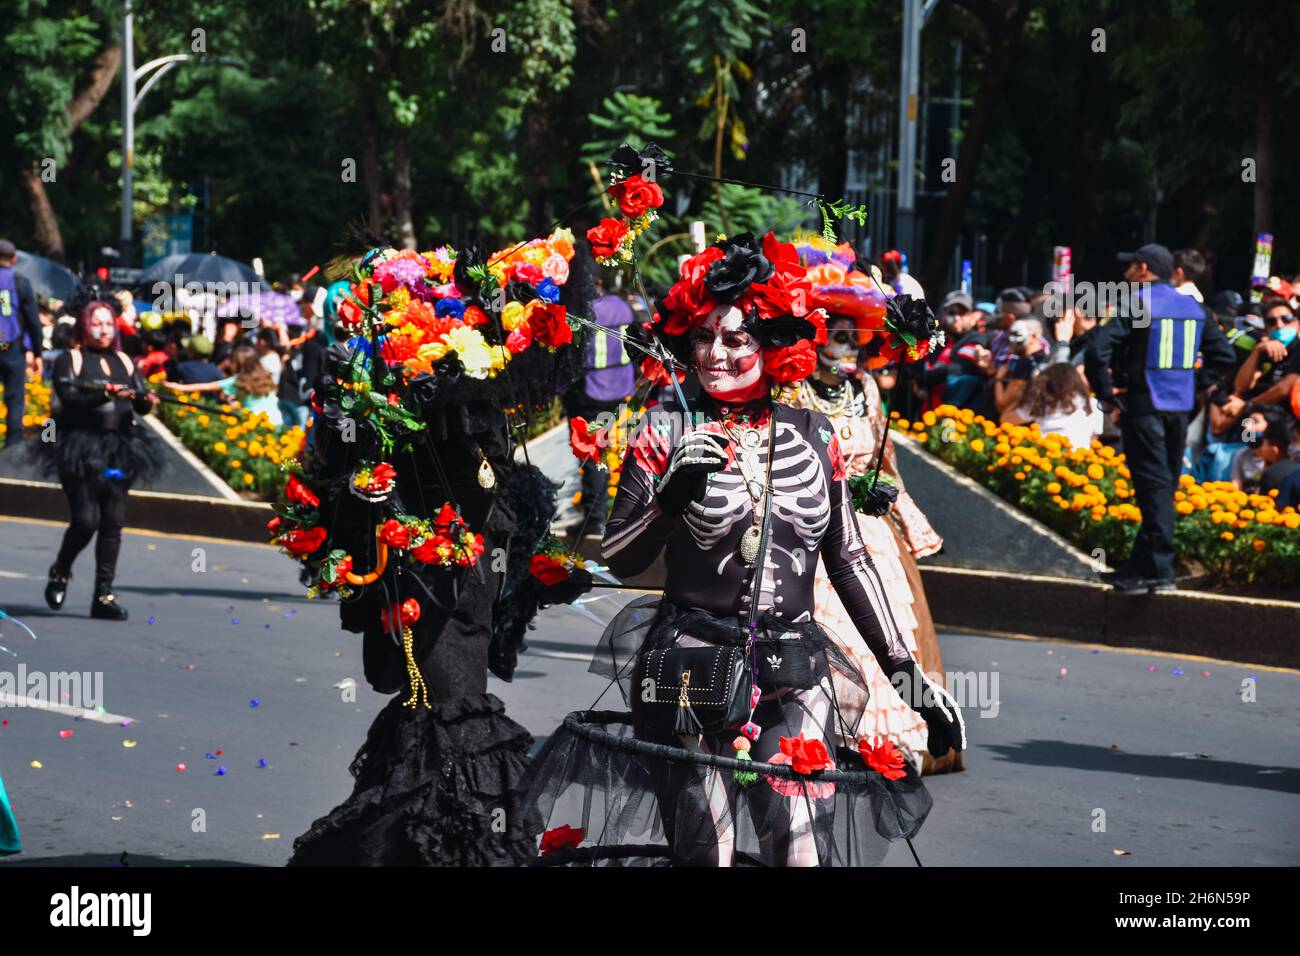 Mexico City, Mexico ; October 31 2021:  Day of the Dead, people in disguise representing catrina during the Day of the Dead parade Stock Photo